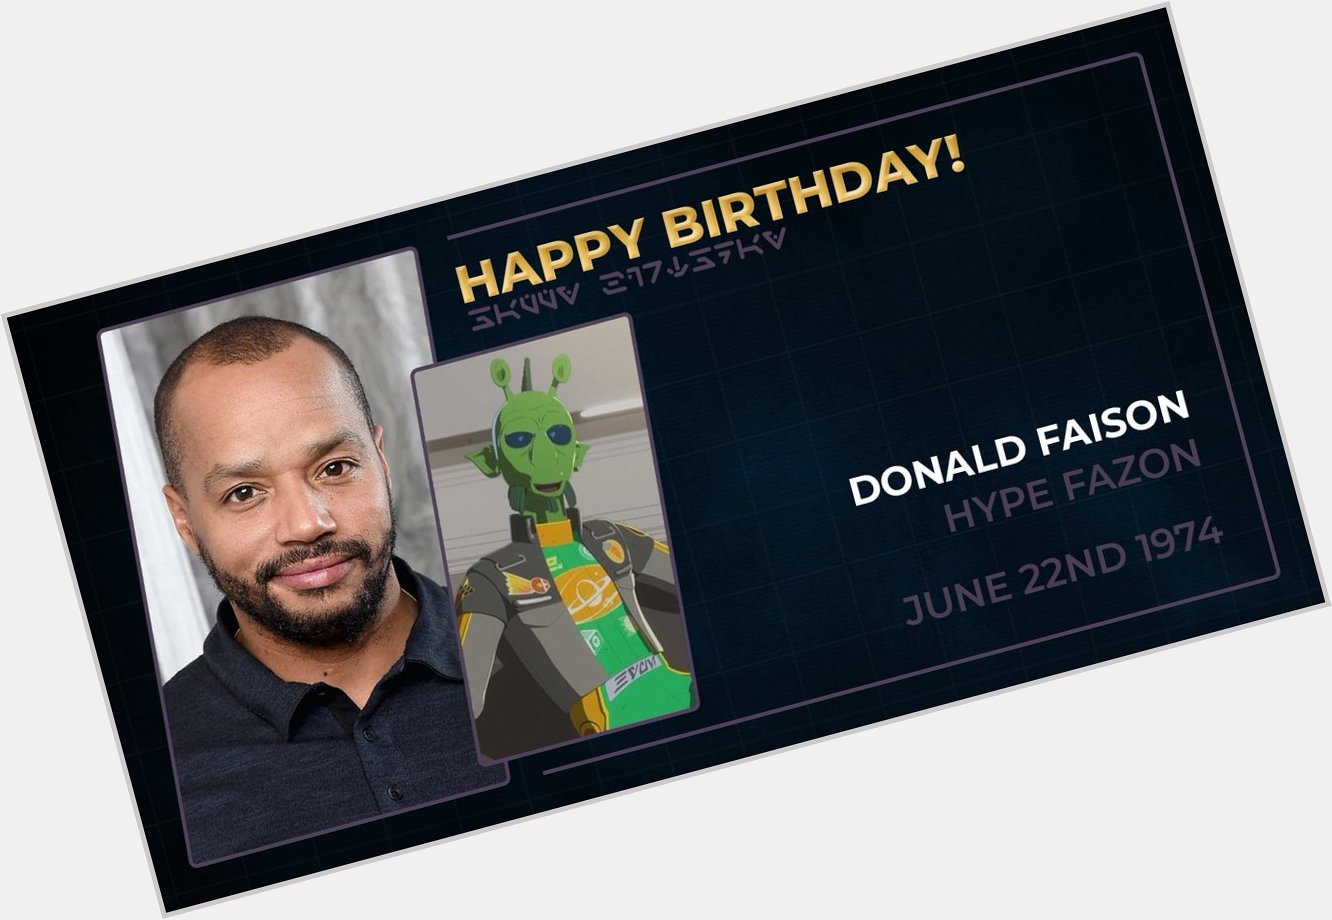 Happy birthday to Donald Faison, who voiced Hype Fazon in    